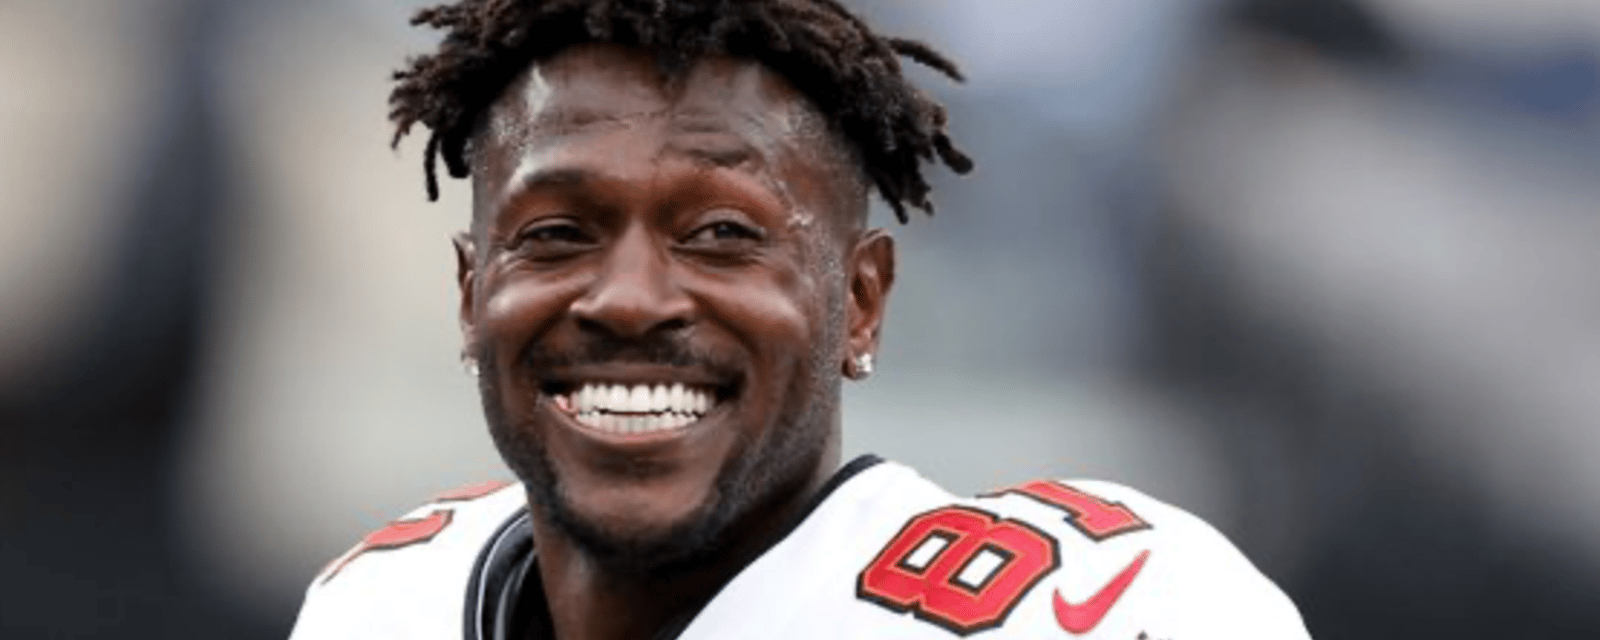 Police ordered to arrest controversial ex-WR Antonio Brown! 